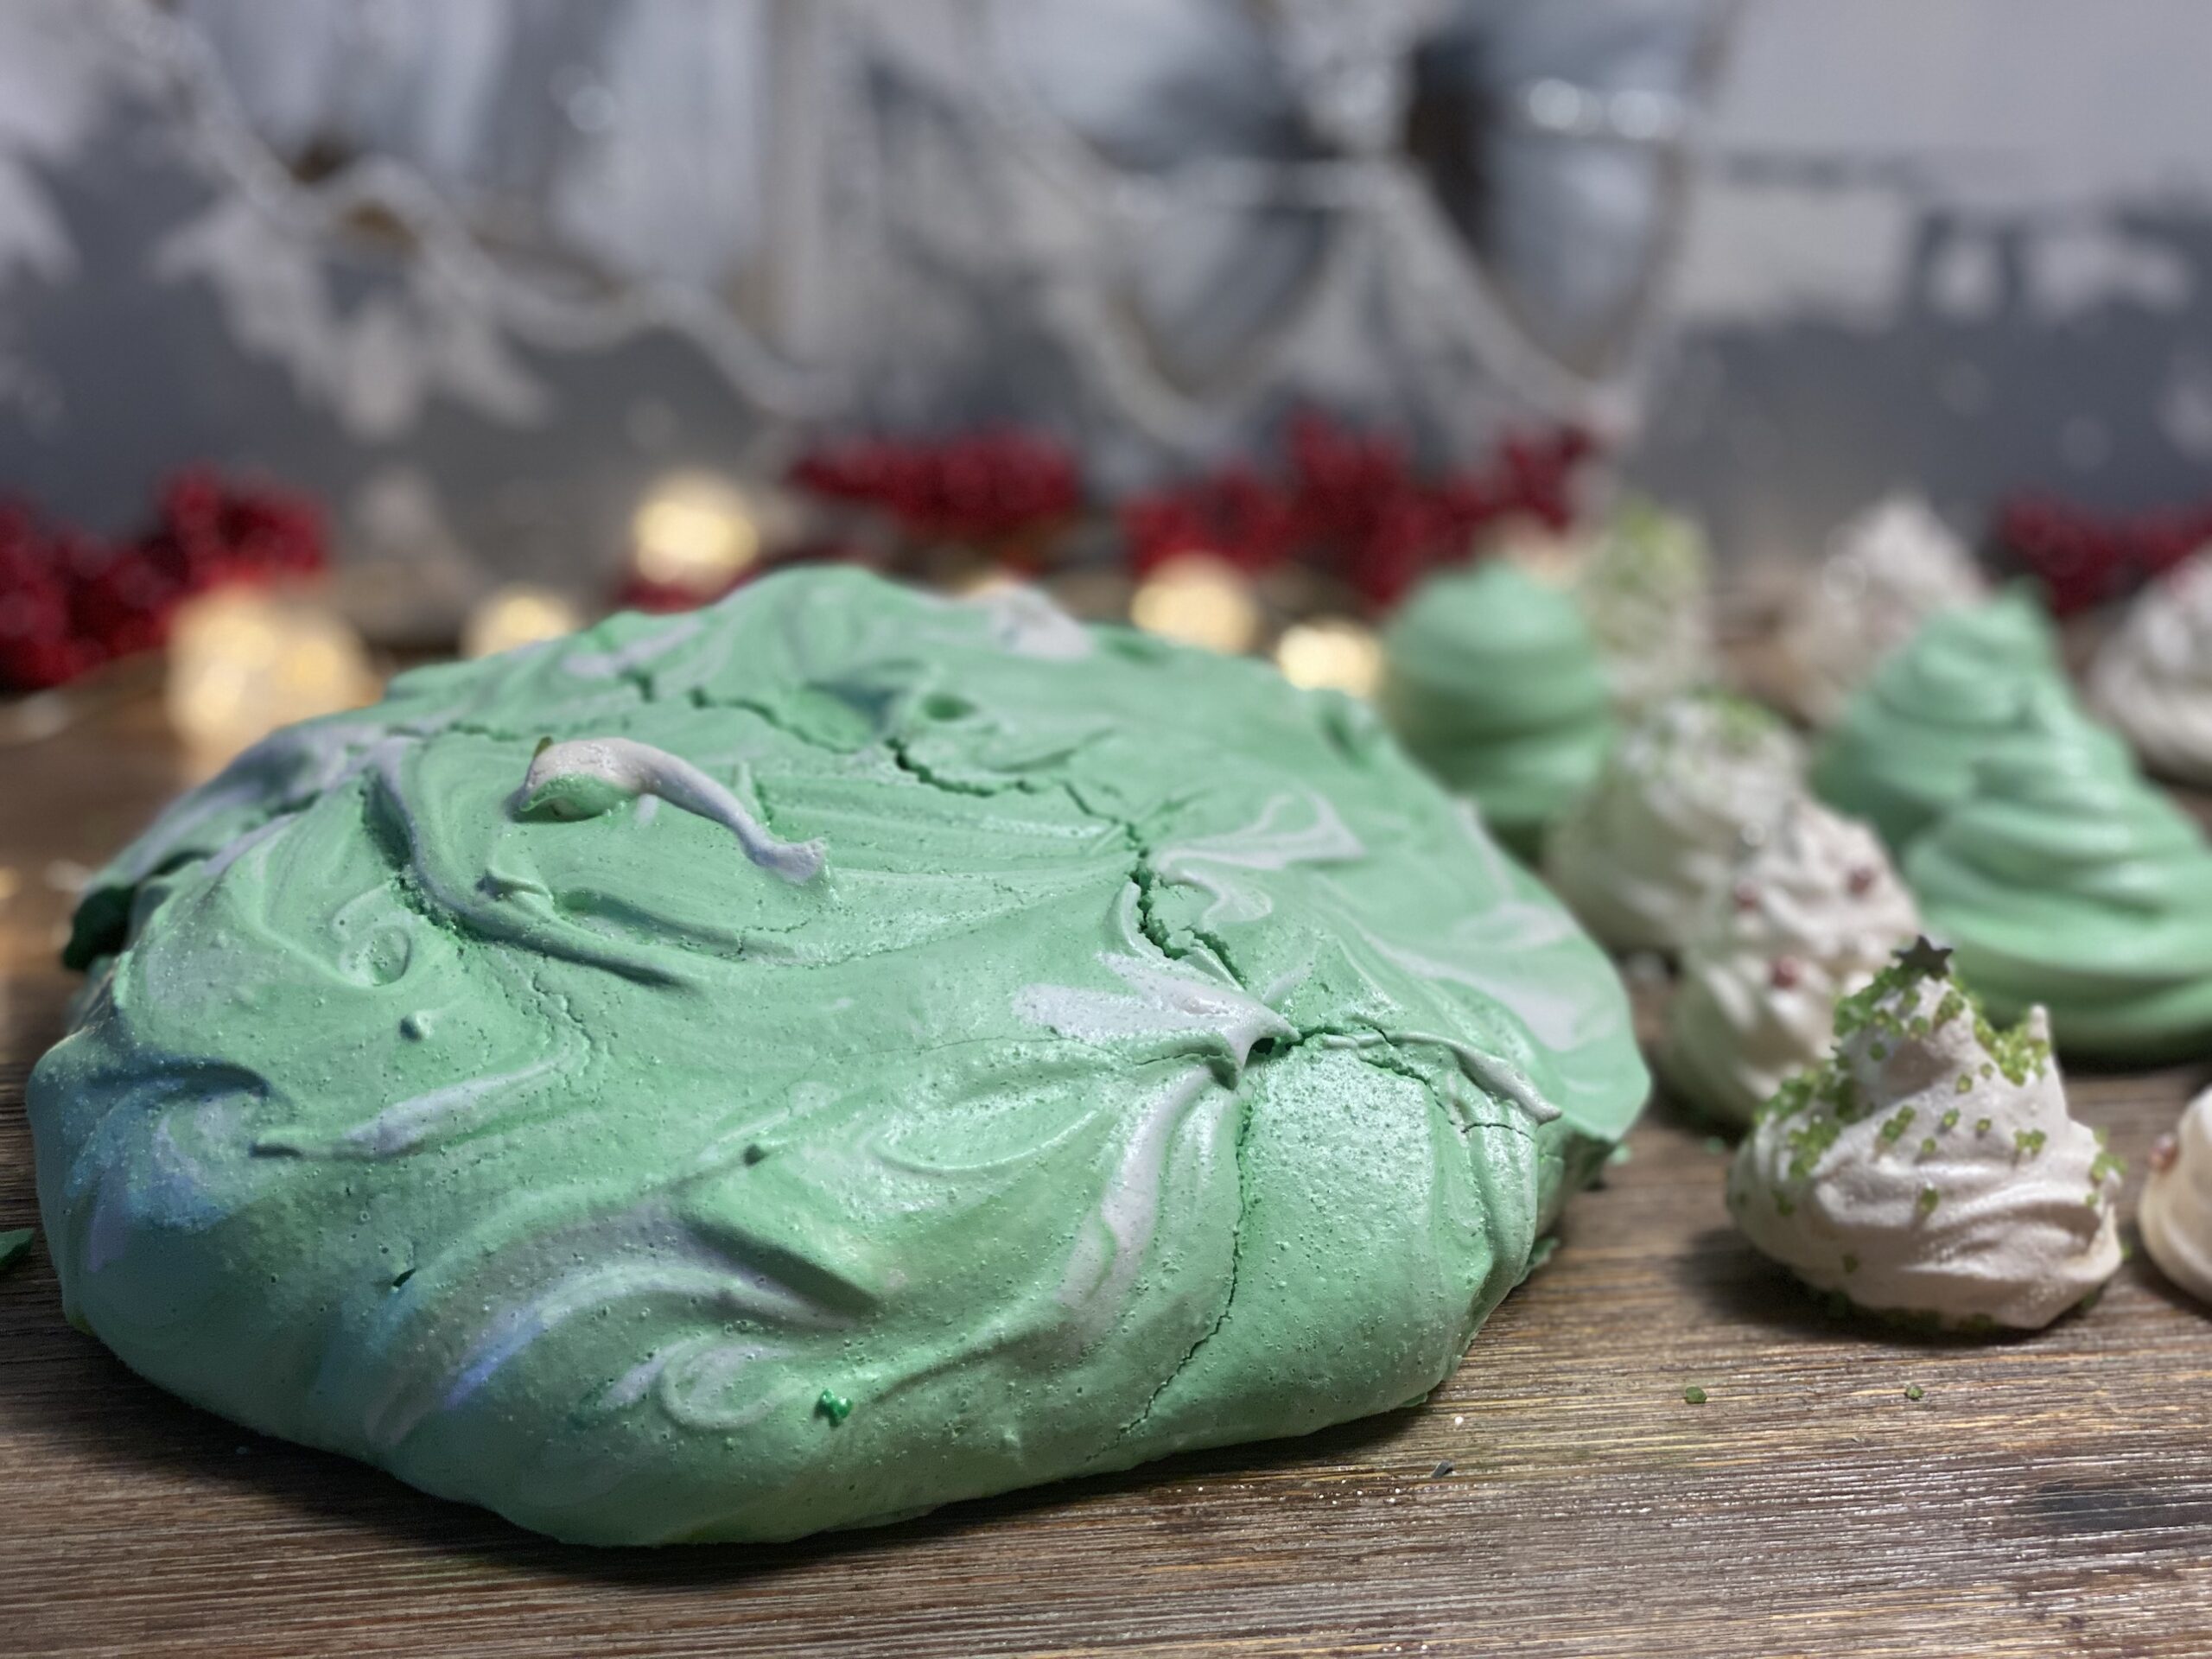 The Christmas Grinch Pavlova | Stay At Home Mum